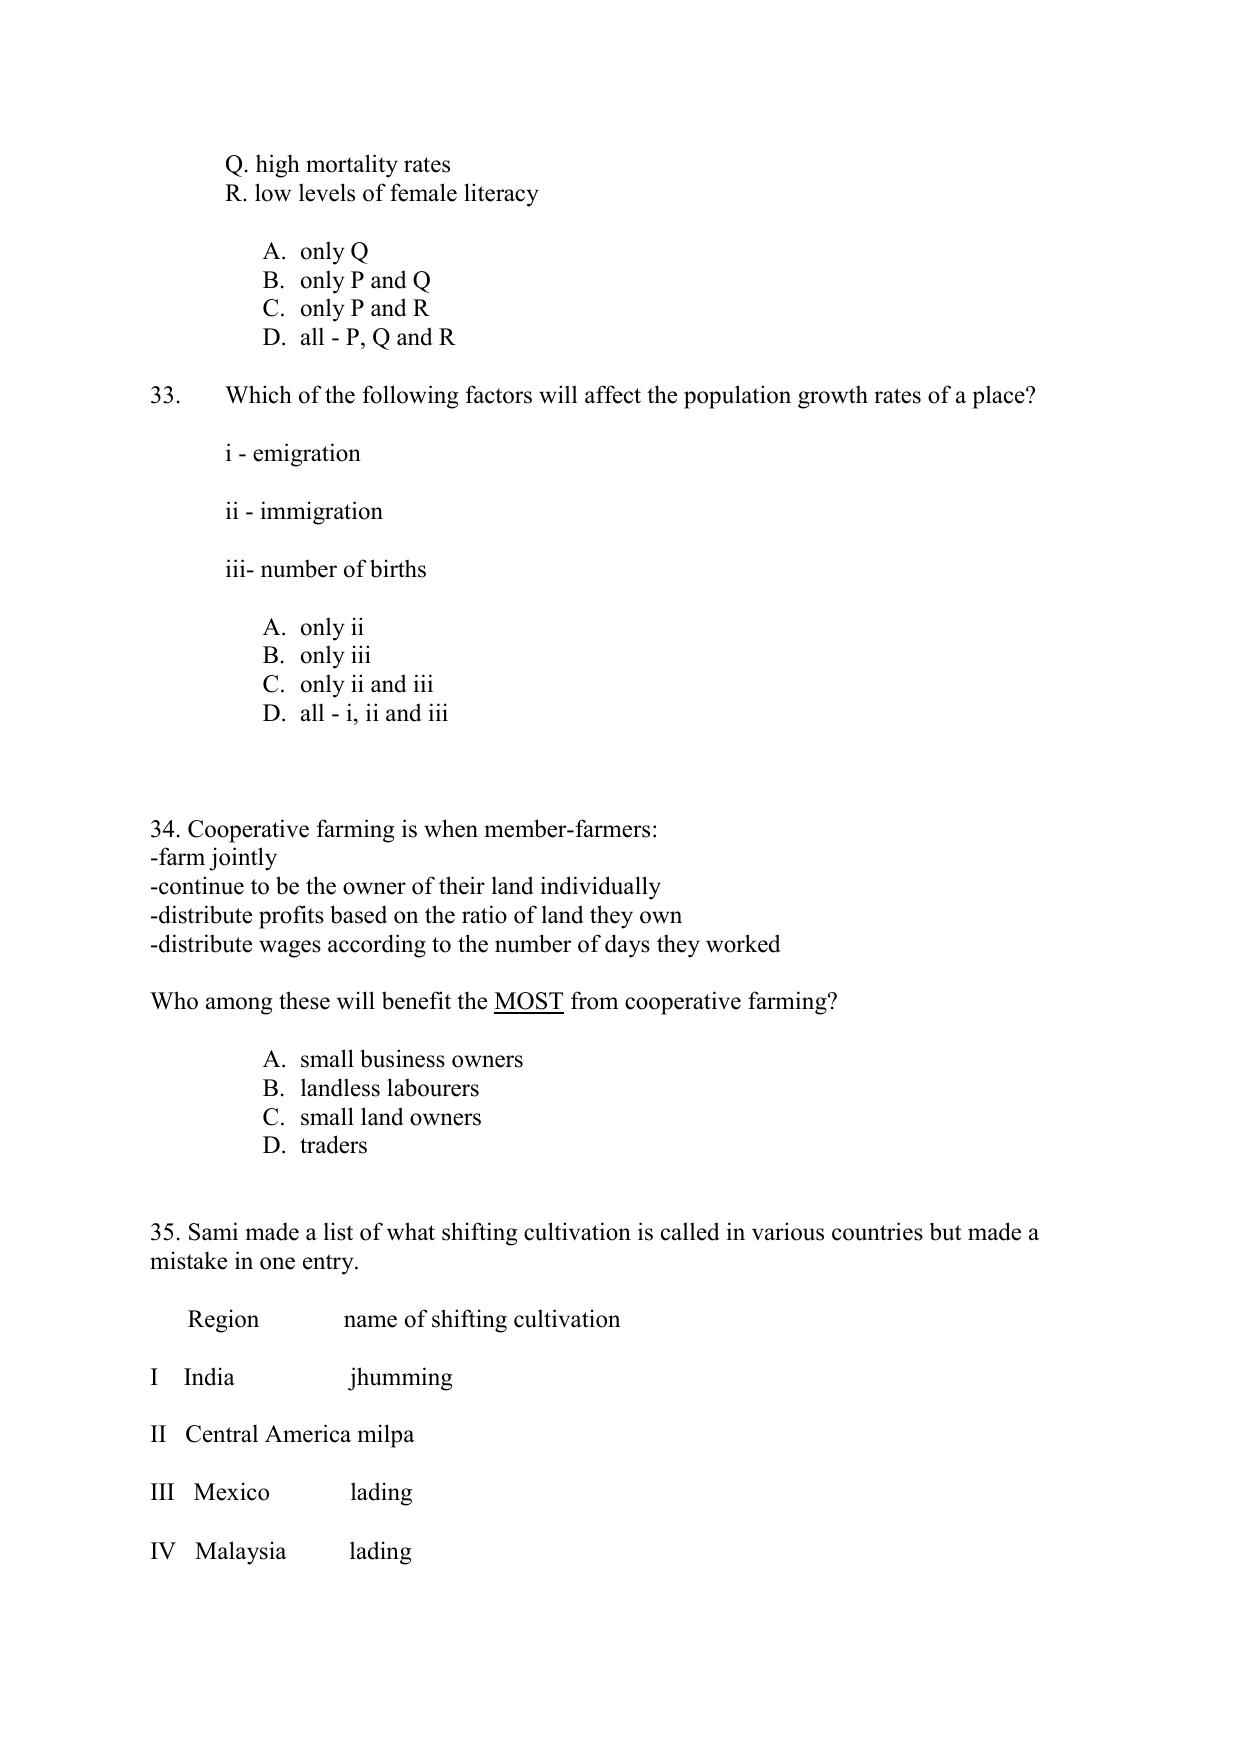 CBSE Class 12 Geography Term 1 Practice Questions 2021-22 - Page 11